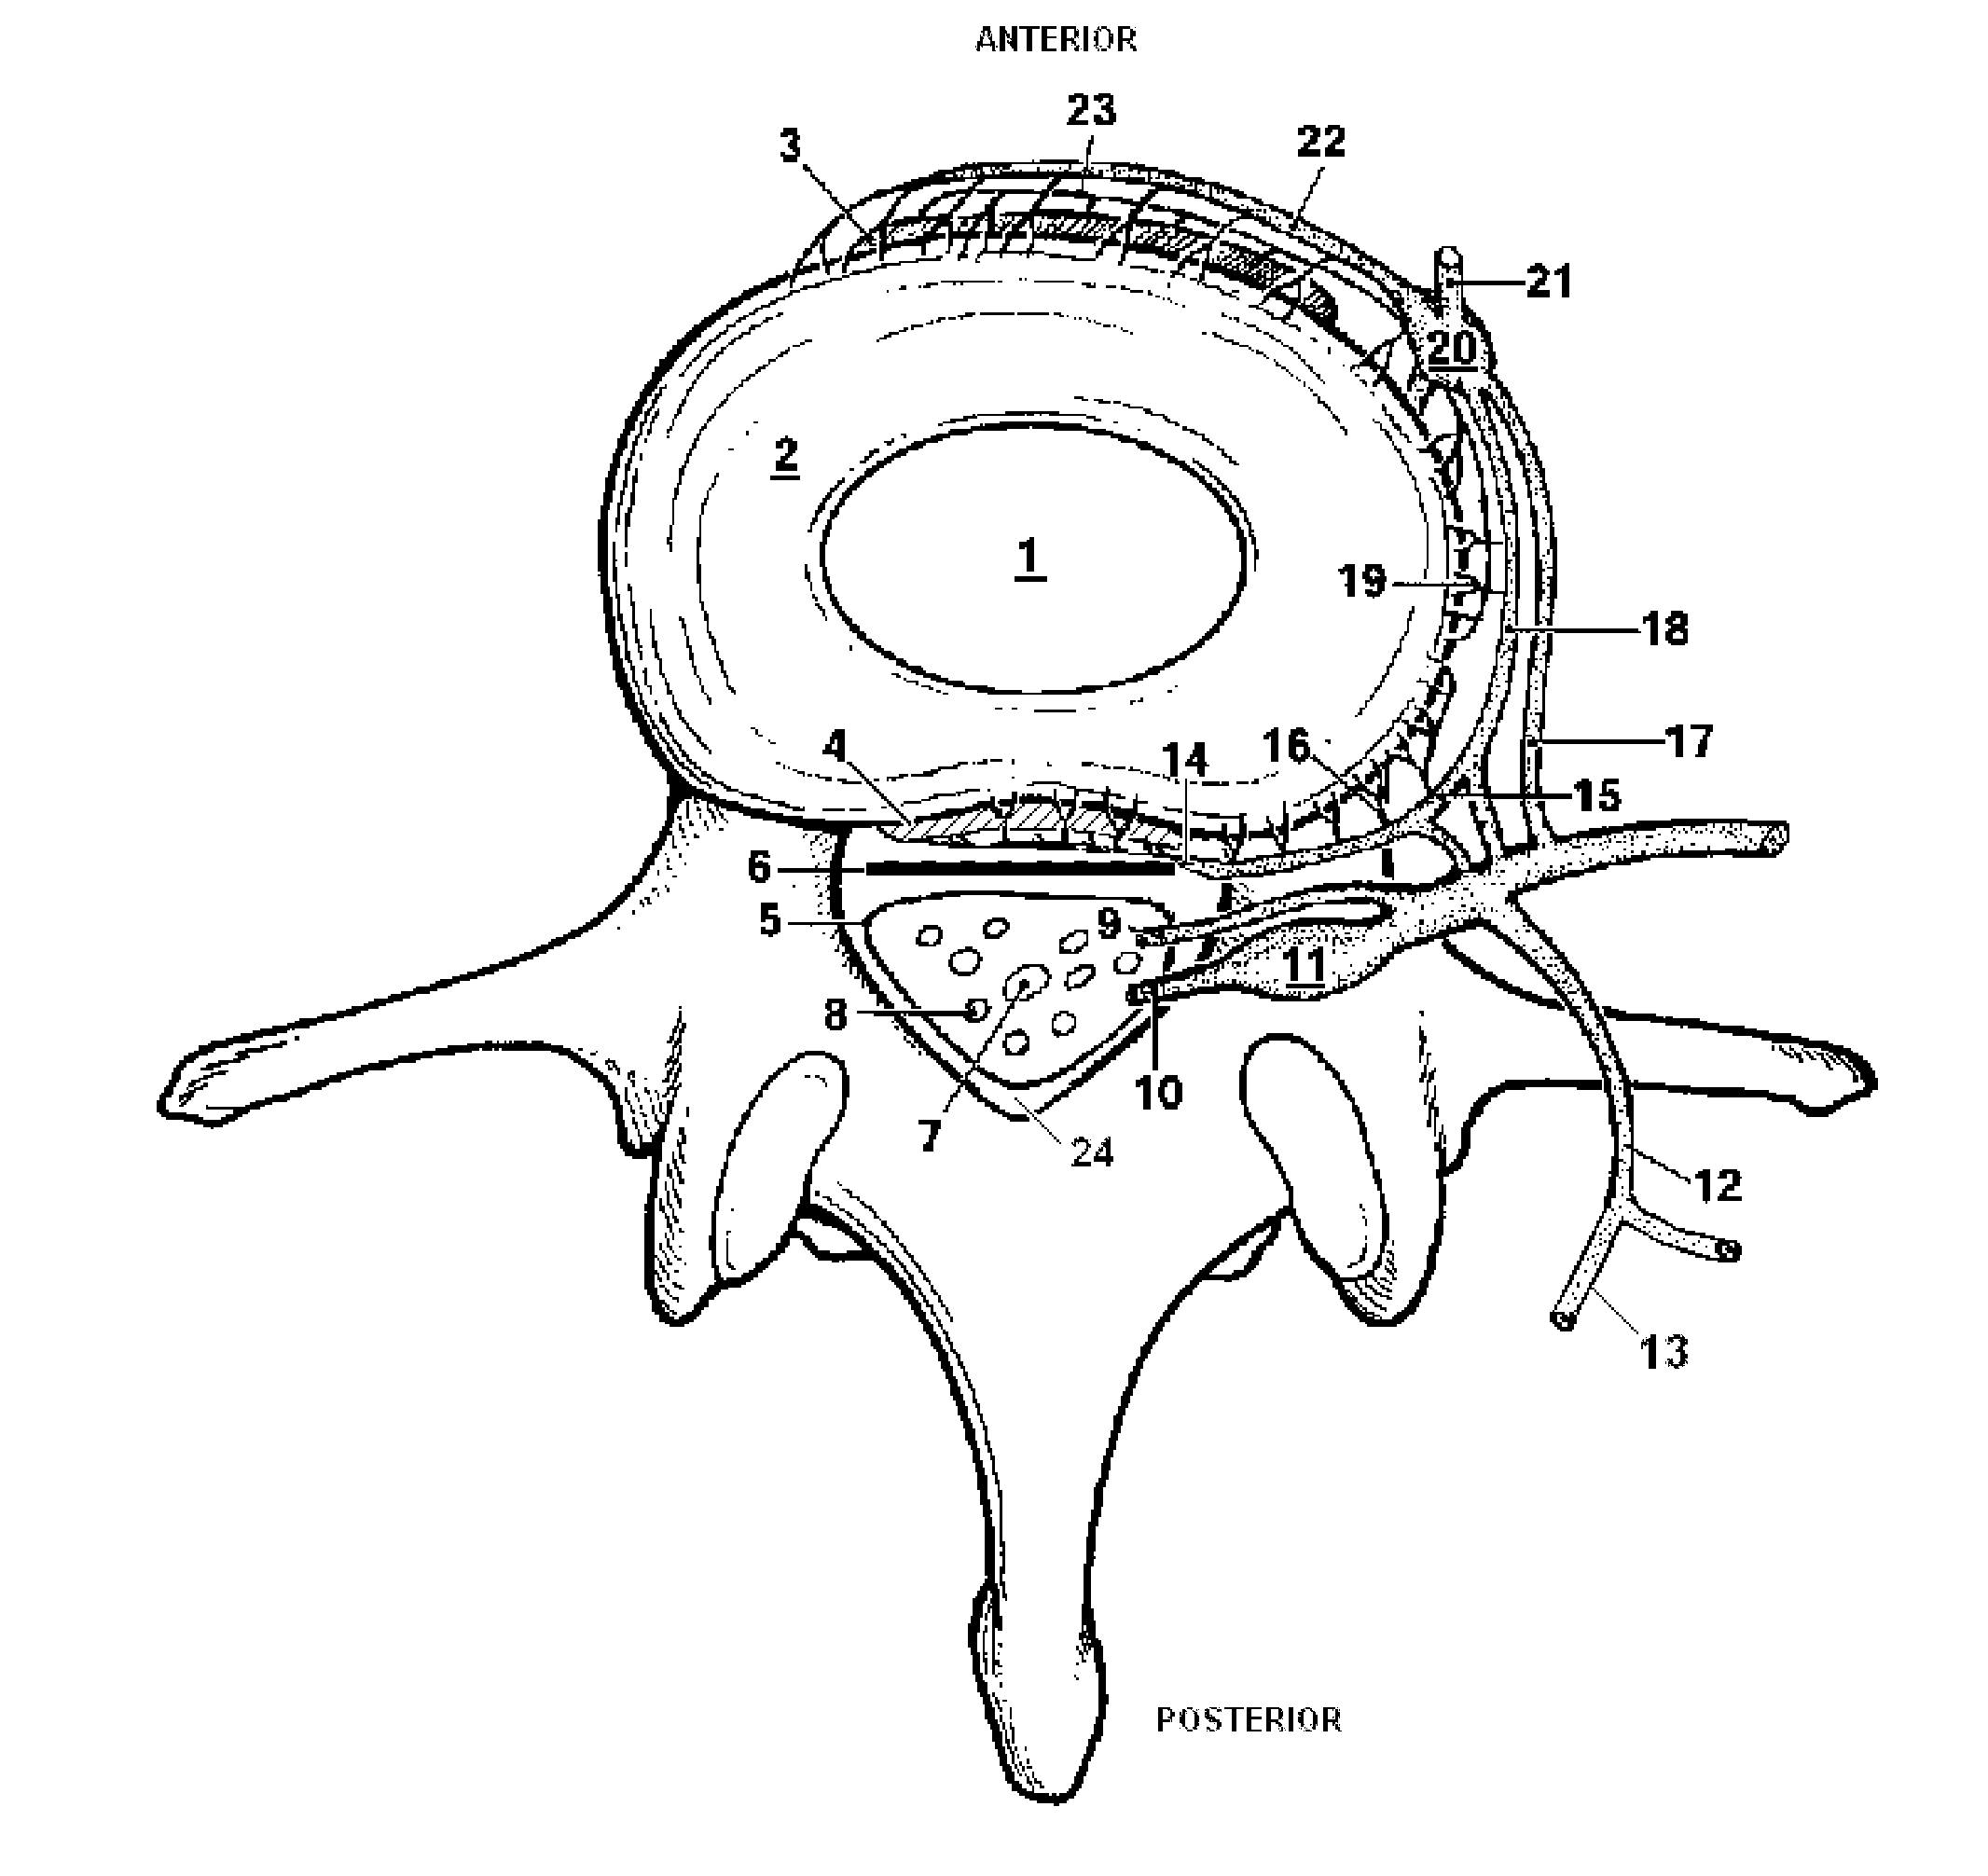 System and Method for Electrical Stimulation of the Lumbar Vertebral Column